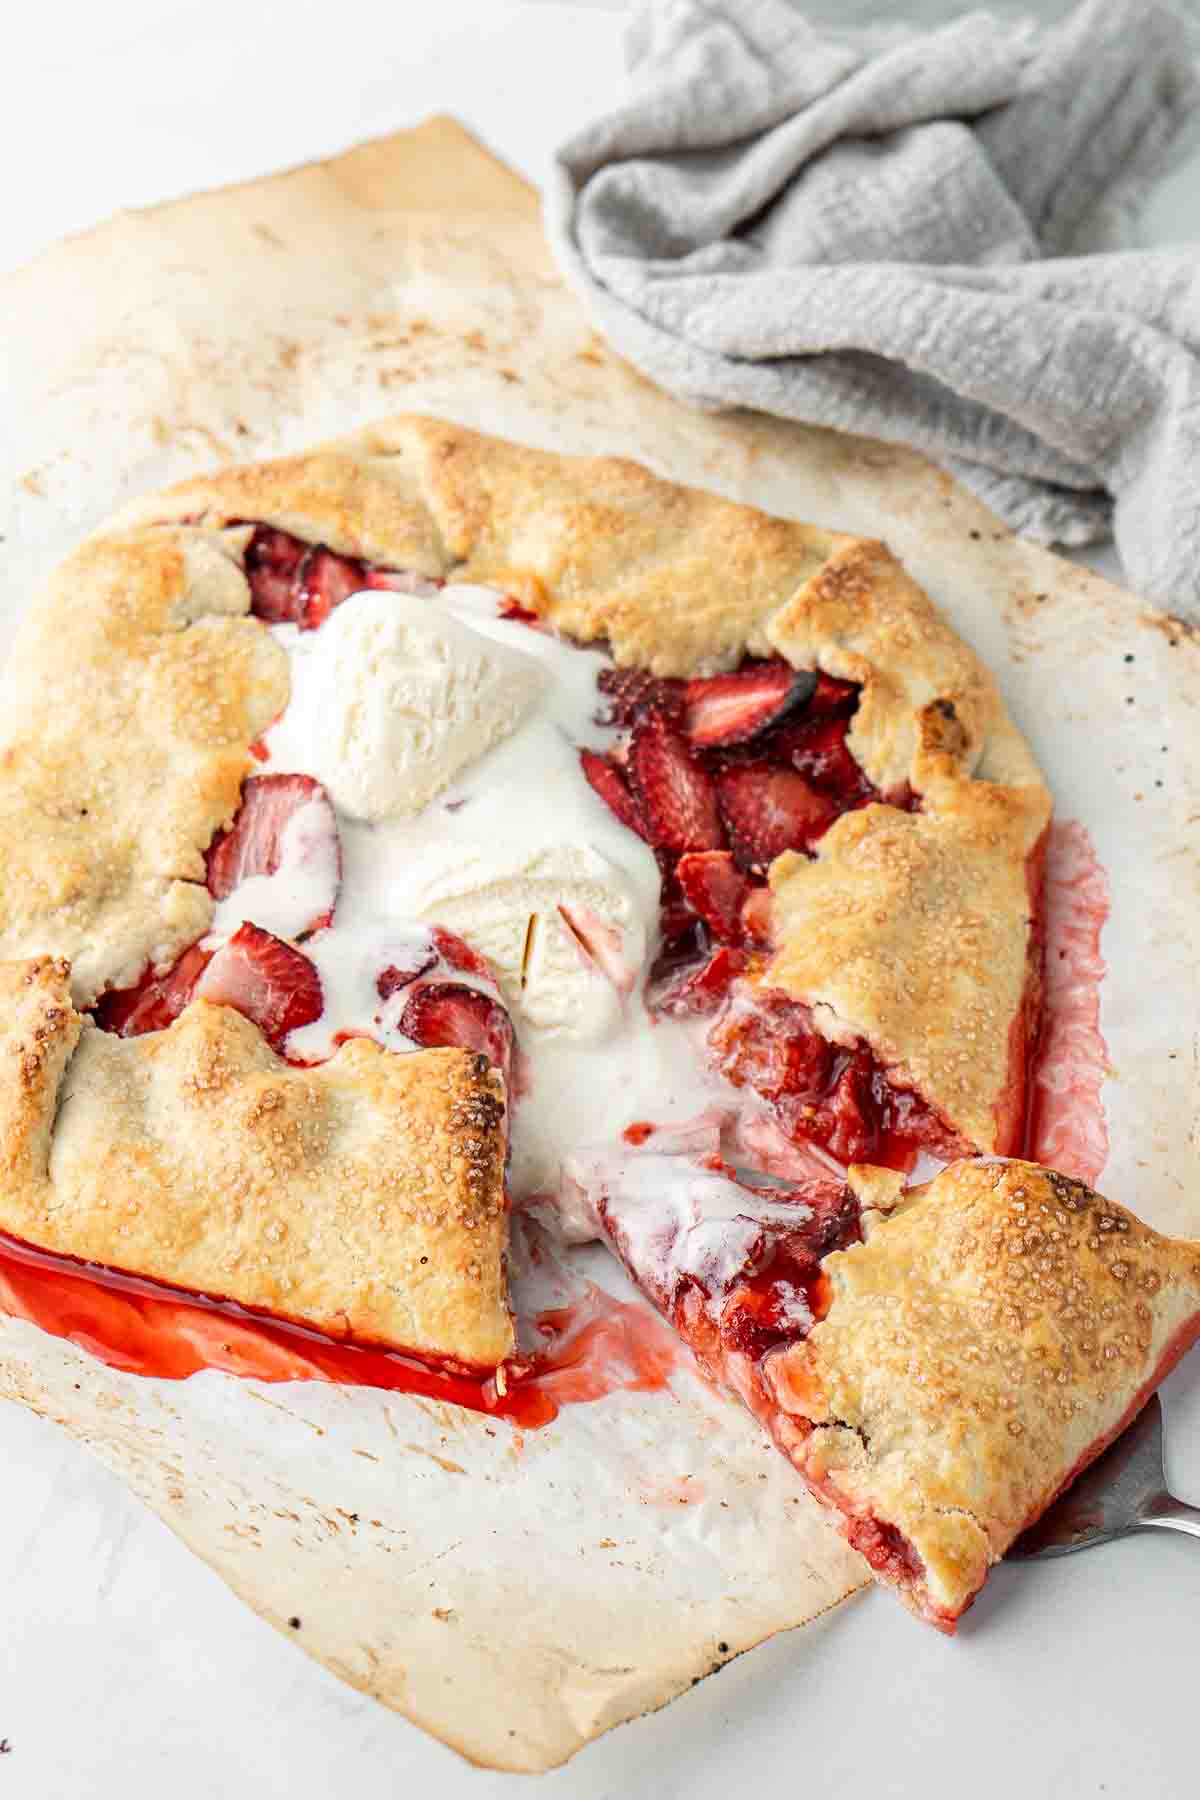 Strawberry galette on baking paper with melted ice cream and a slice being served.